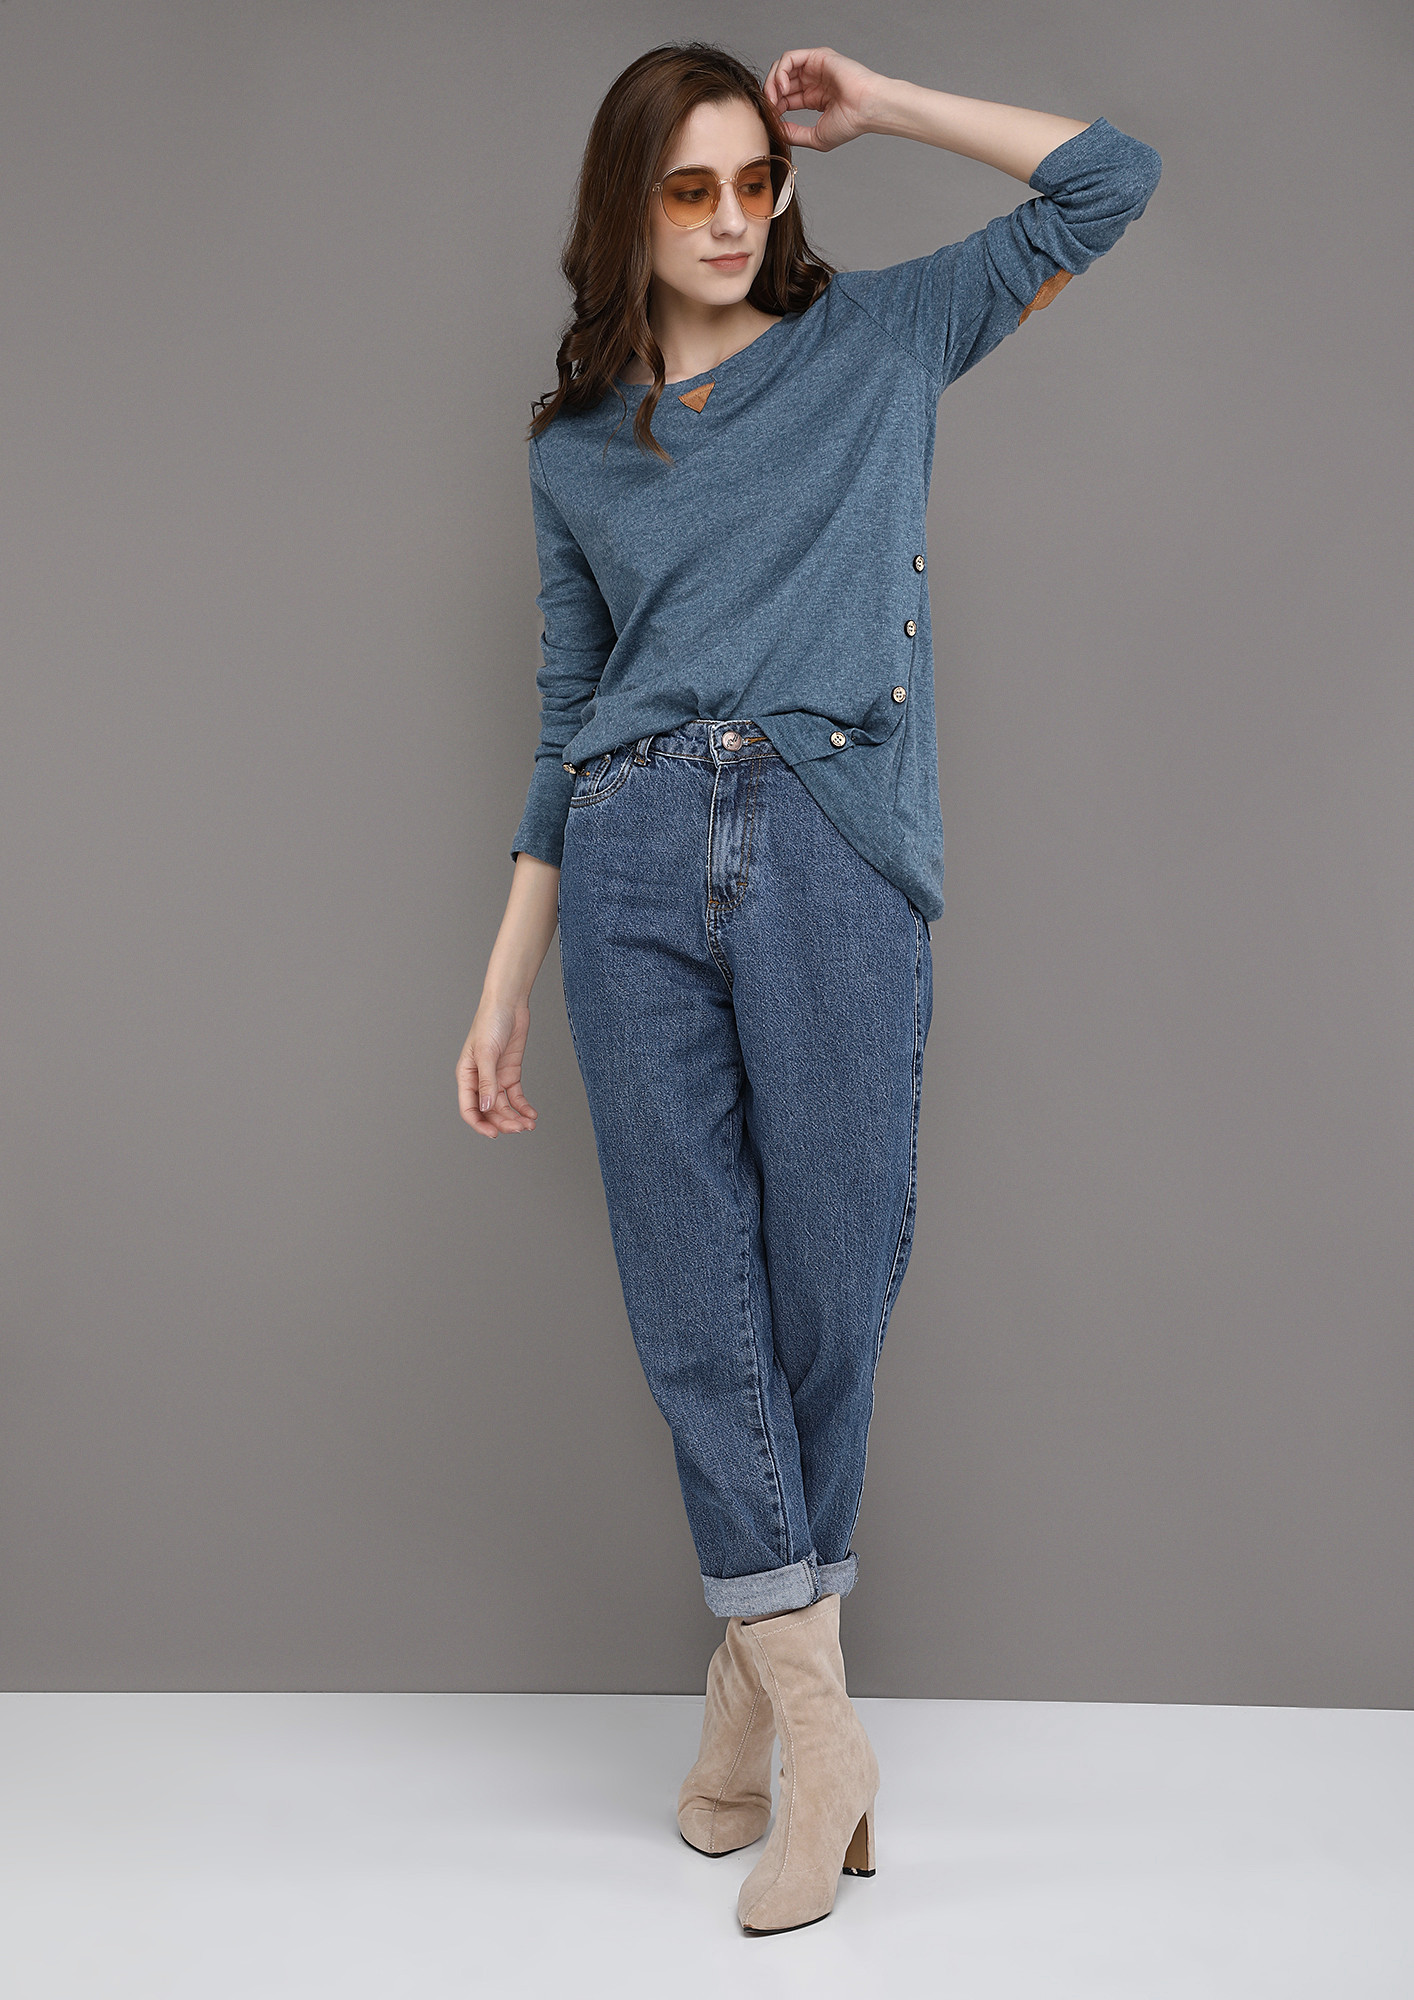 COMFORTABLY YOURS BLUE TOP